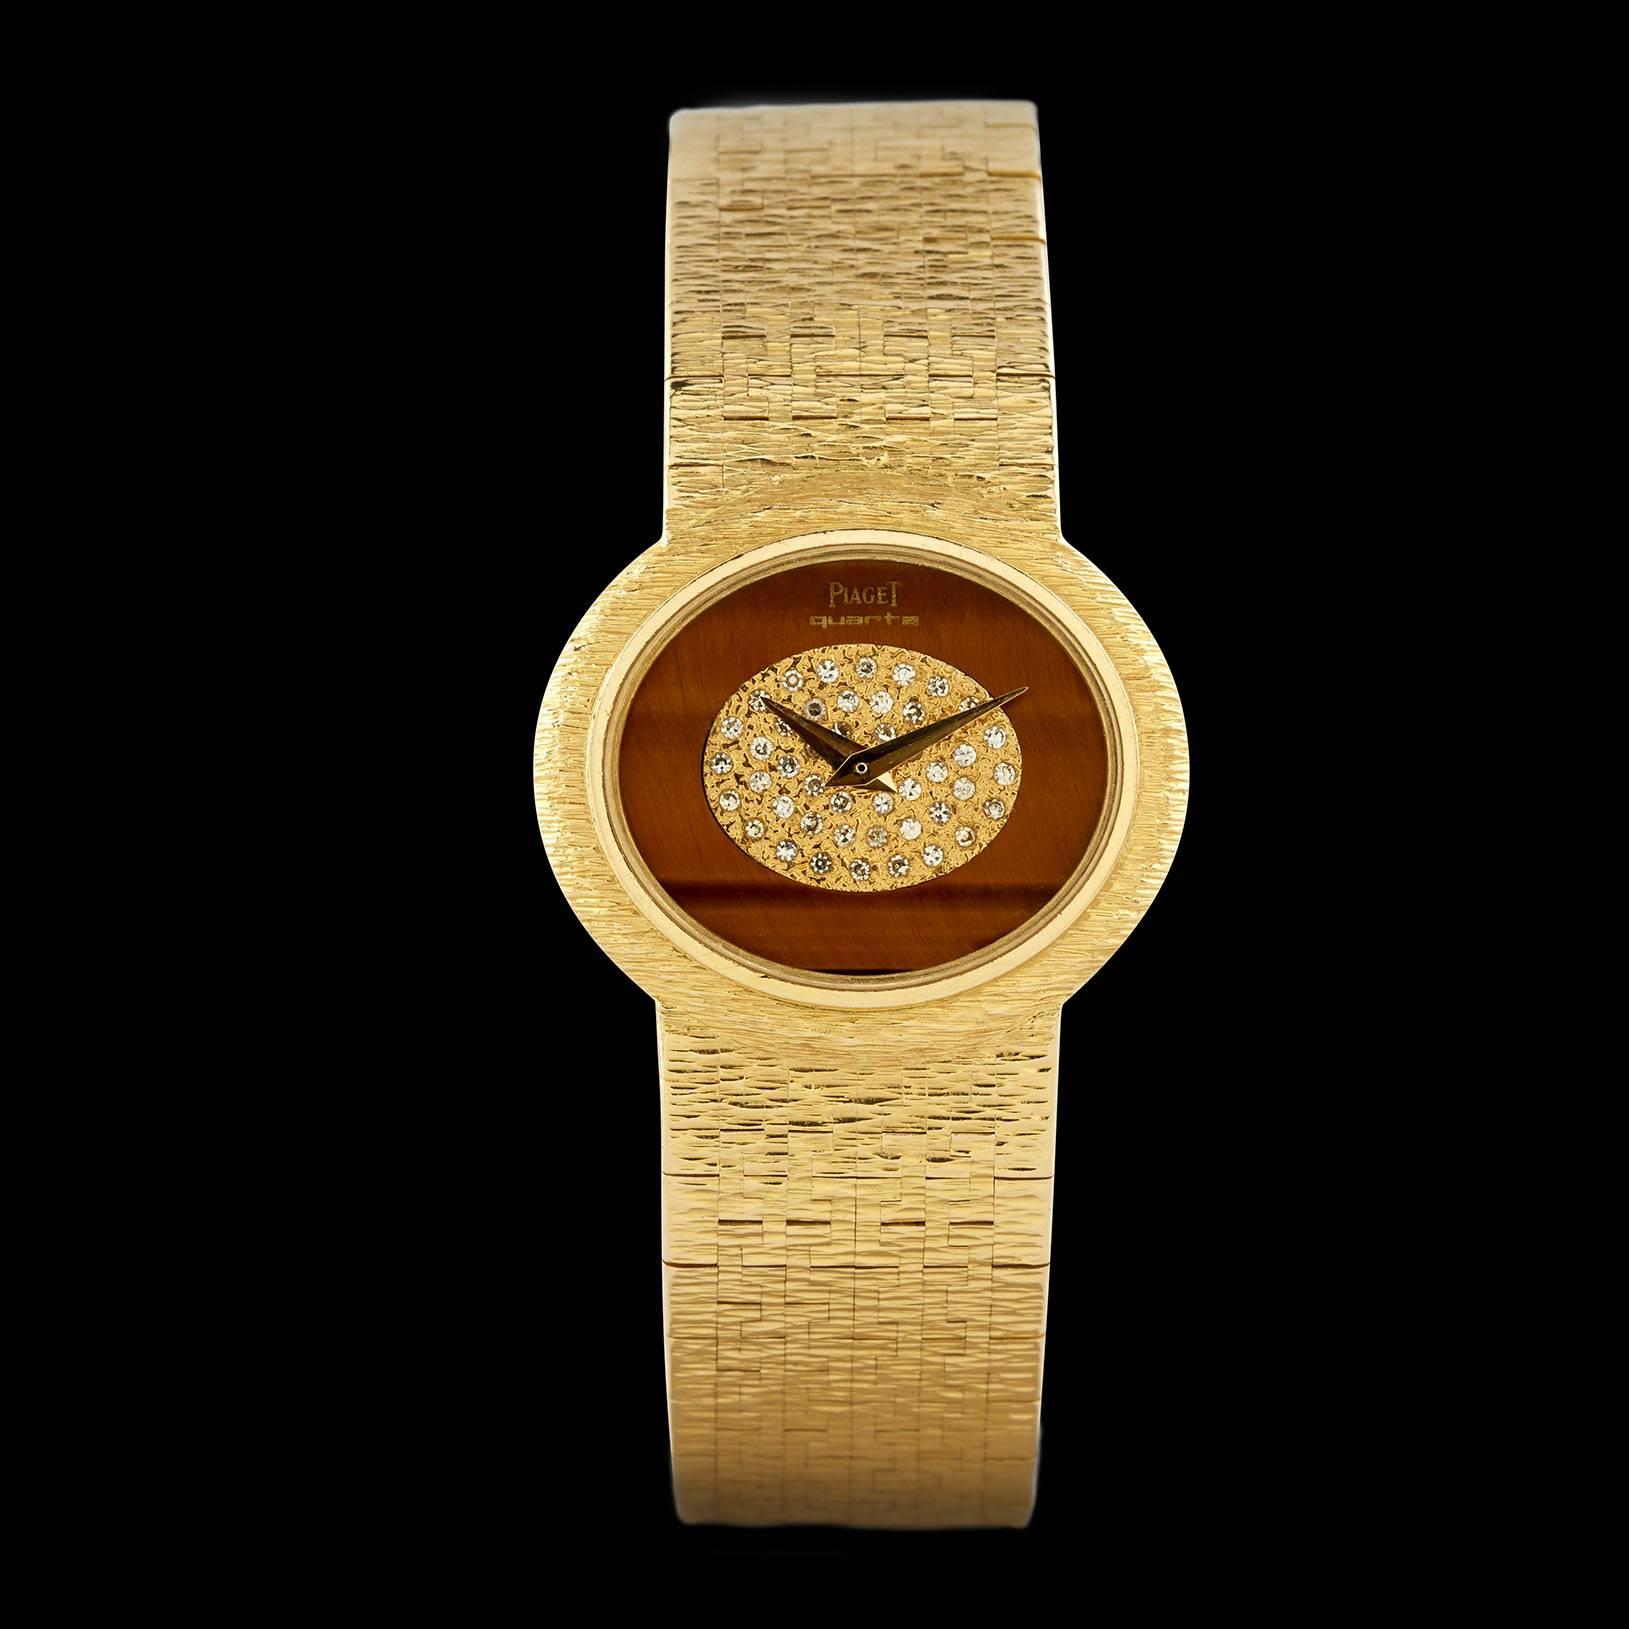 Rare Circa 70s 18K Yellow Gold Piaget Watch with Tigers Eye Quartz Dial & Single Cut Diamonds. The case size of the watch is 27mm on a 0.62″ wide bracelet. There are 24 round single cut diamonds set in the dial of the watch totaling approximately